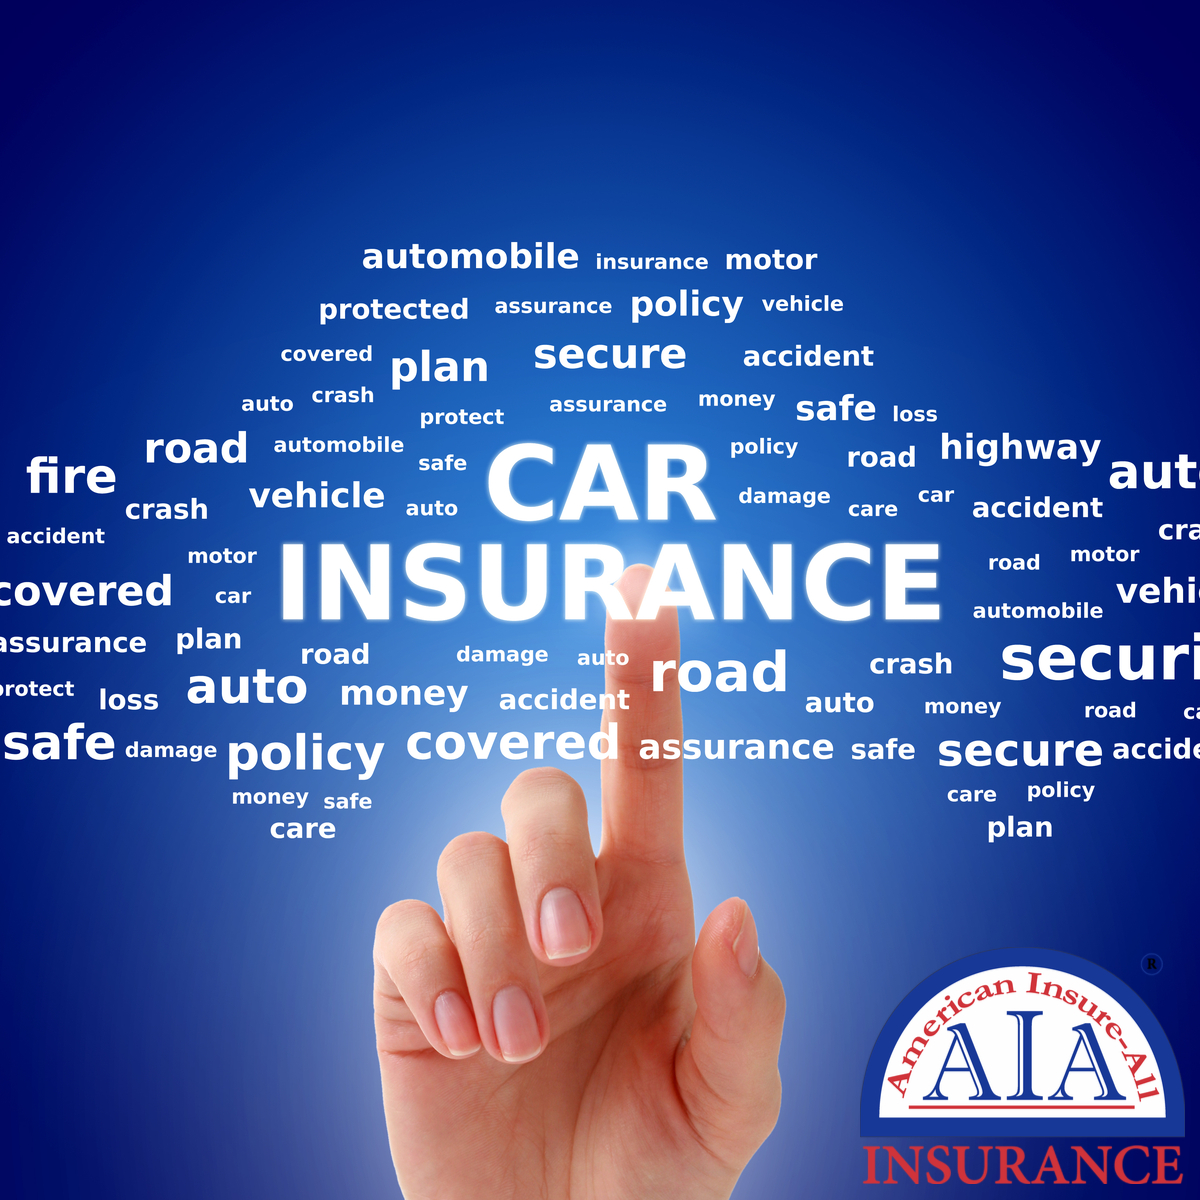 Peace of Mind with Affordable Auto Insurance from American Insure-All®!